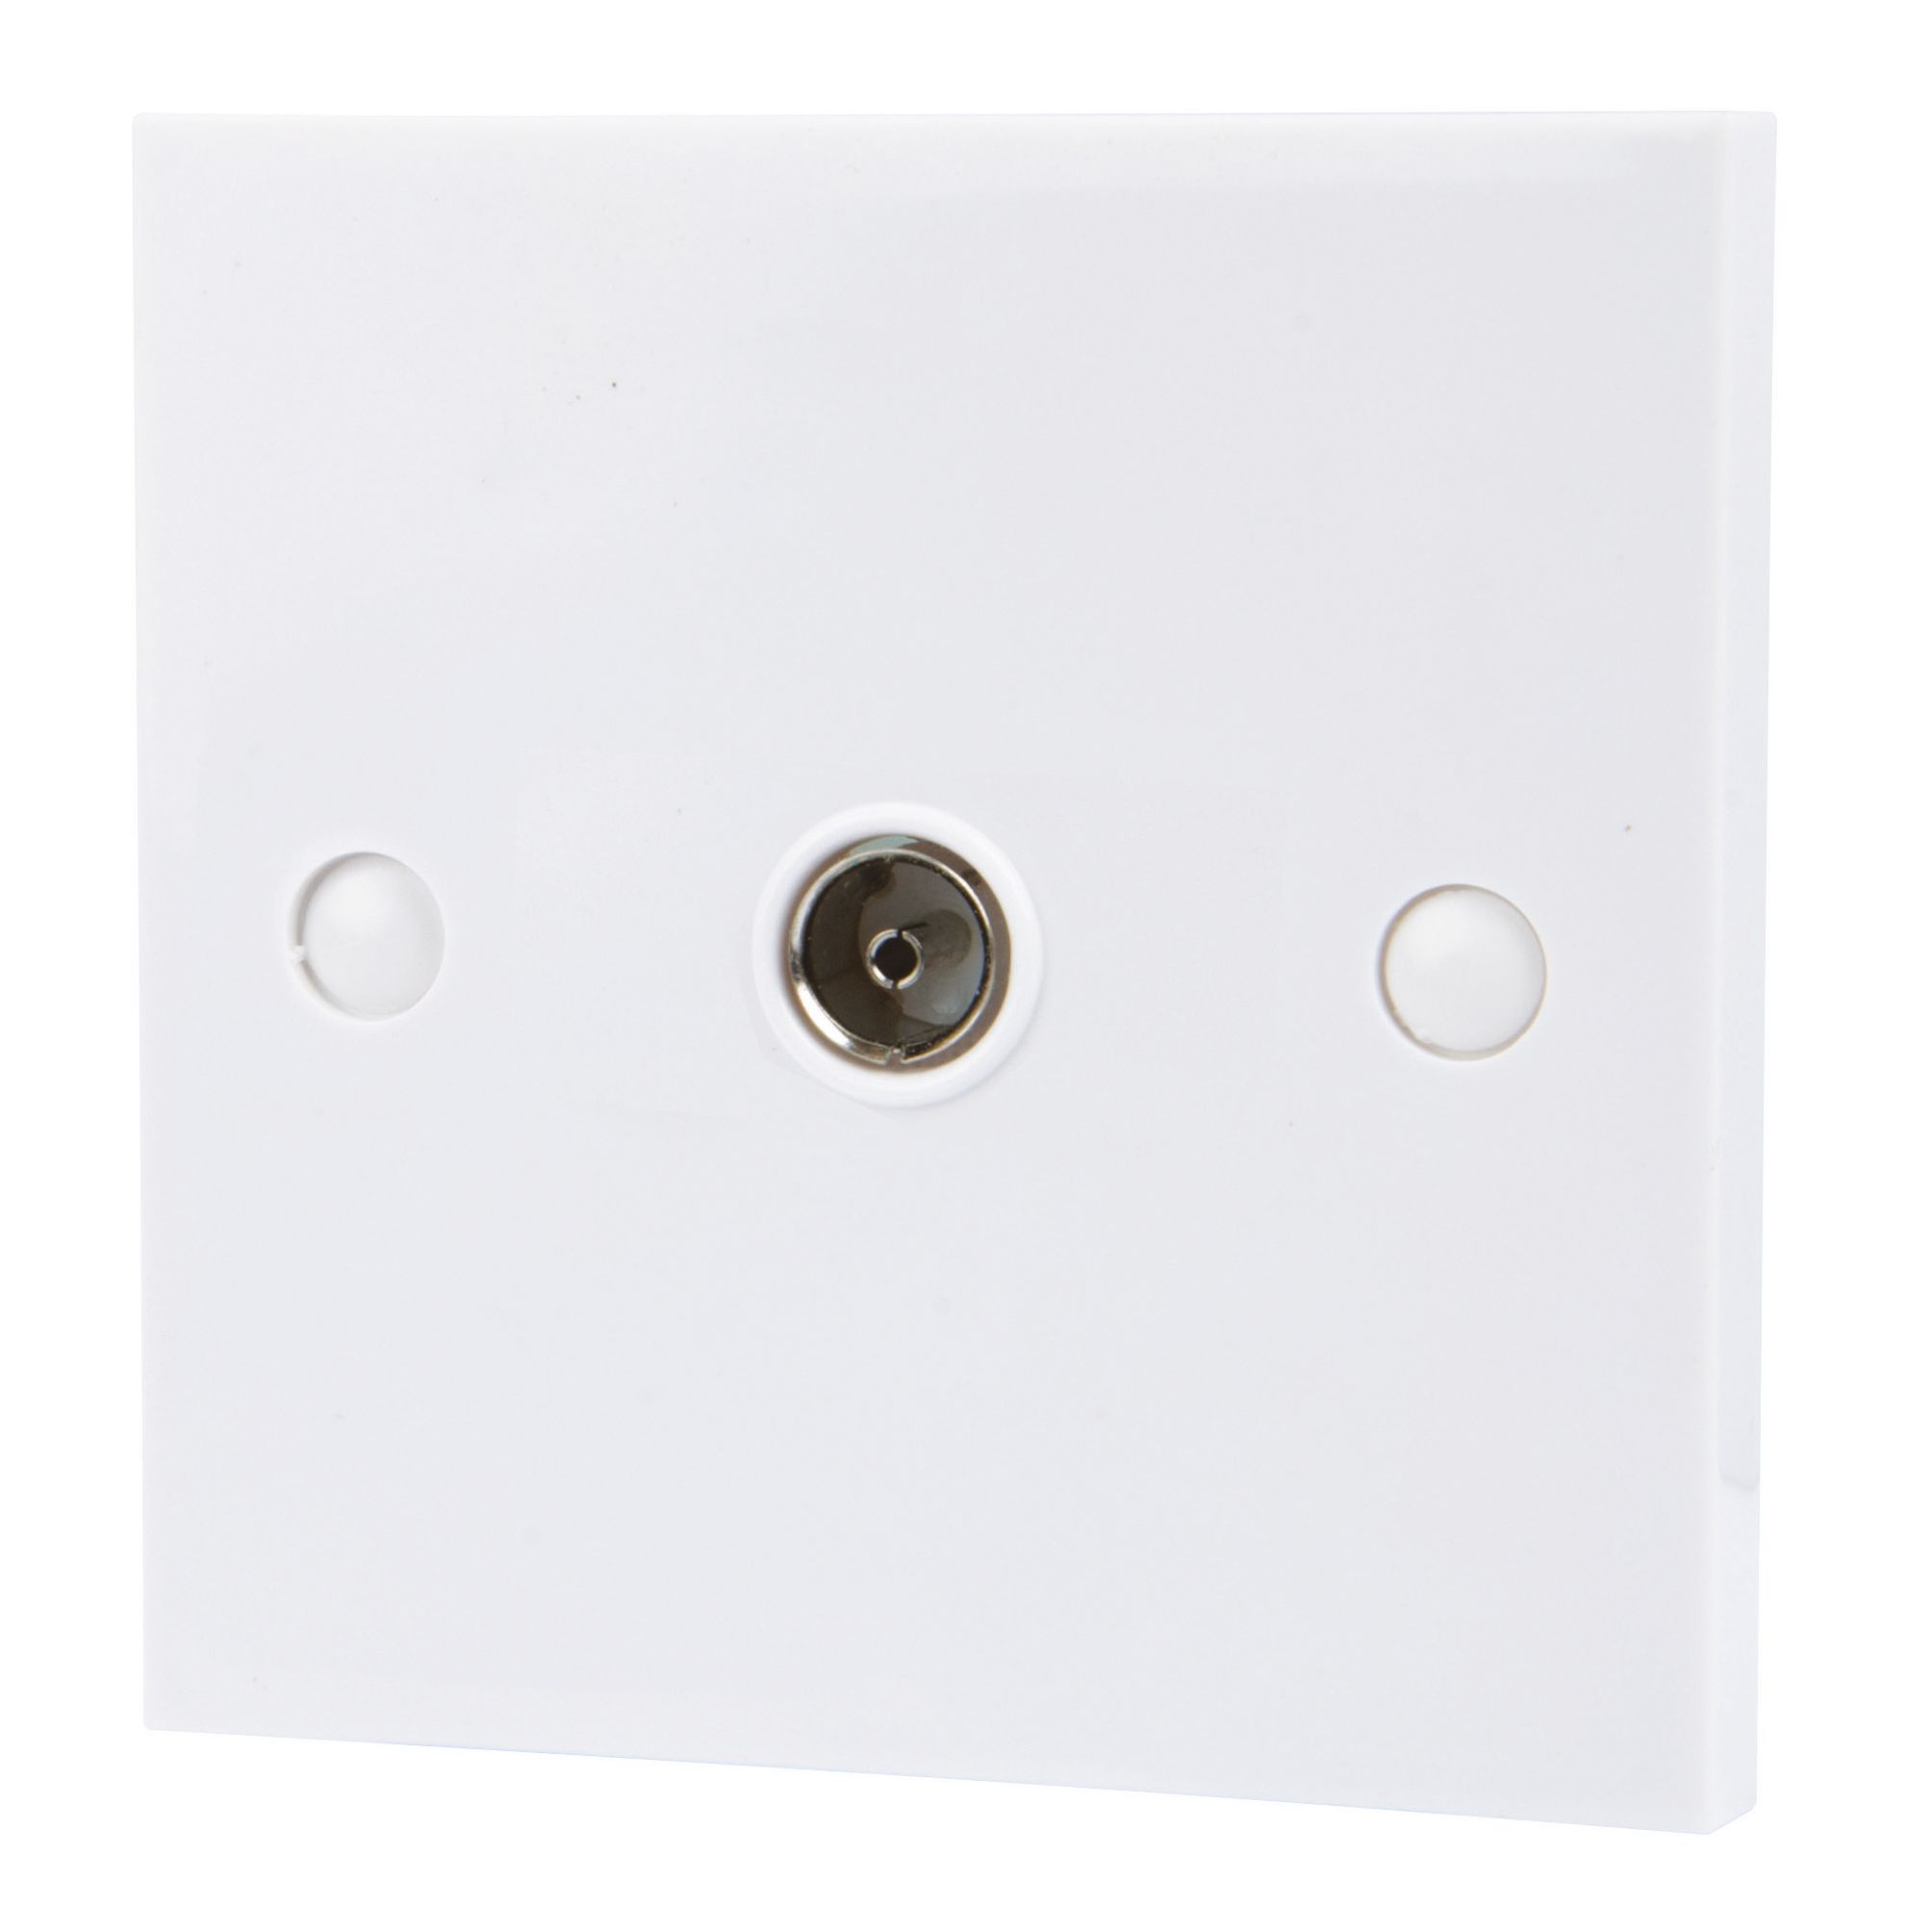 SLX White 1 gang Plastic Coaxial outlet